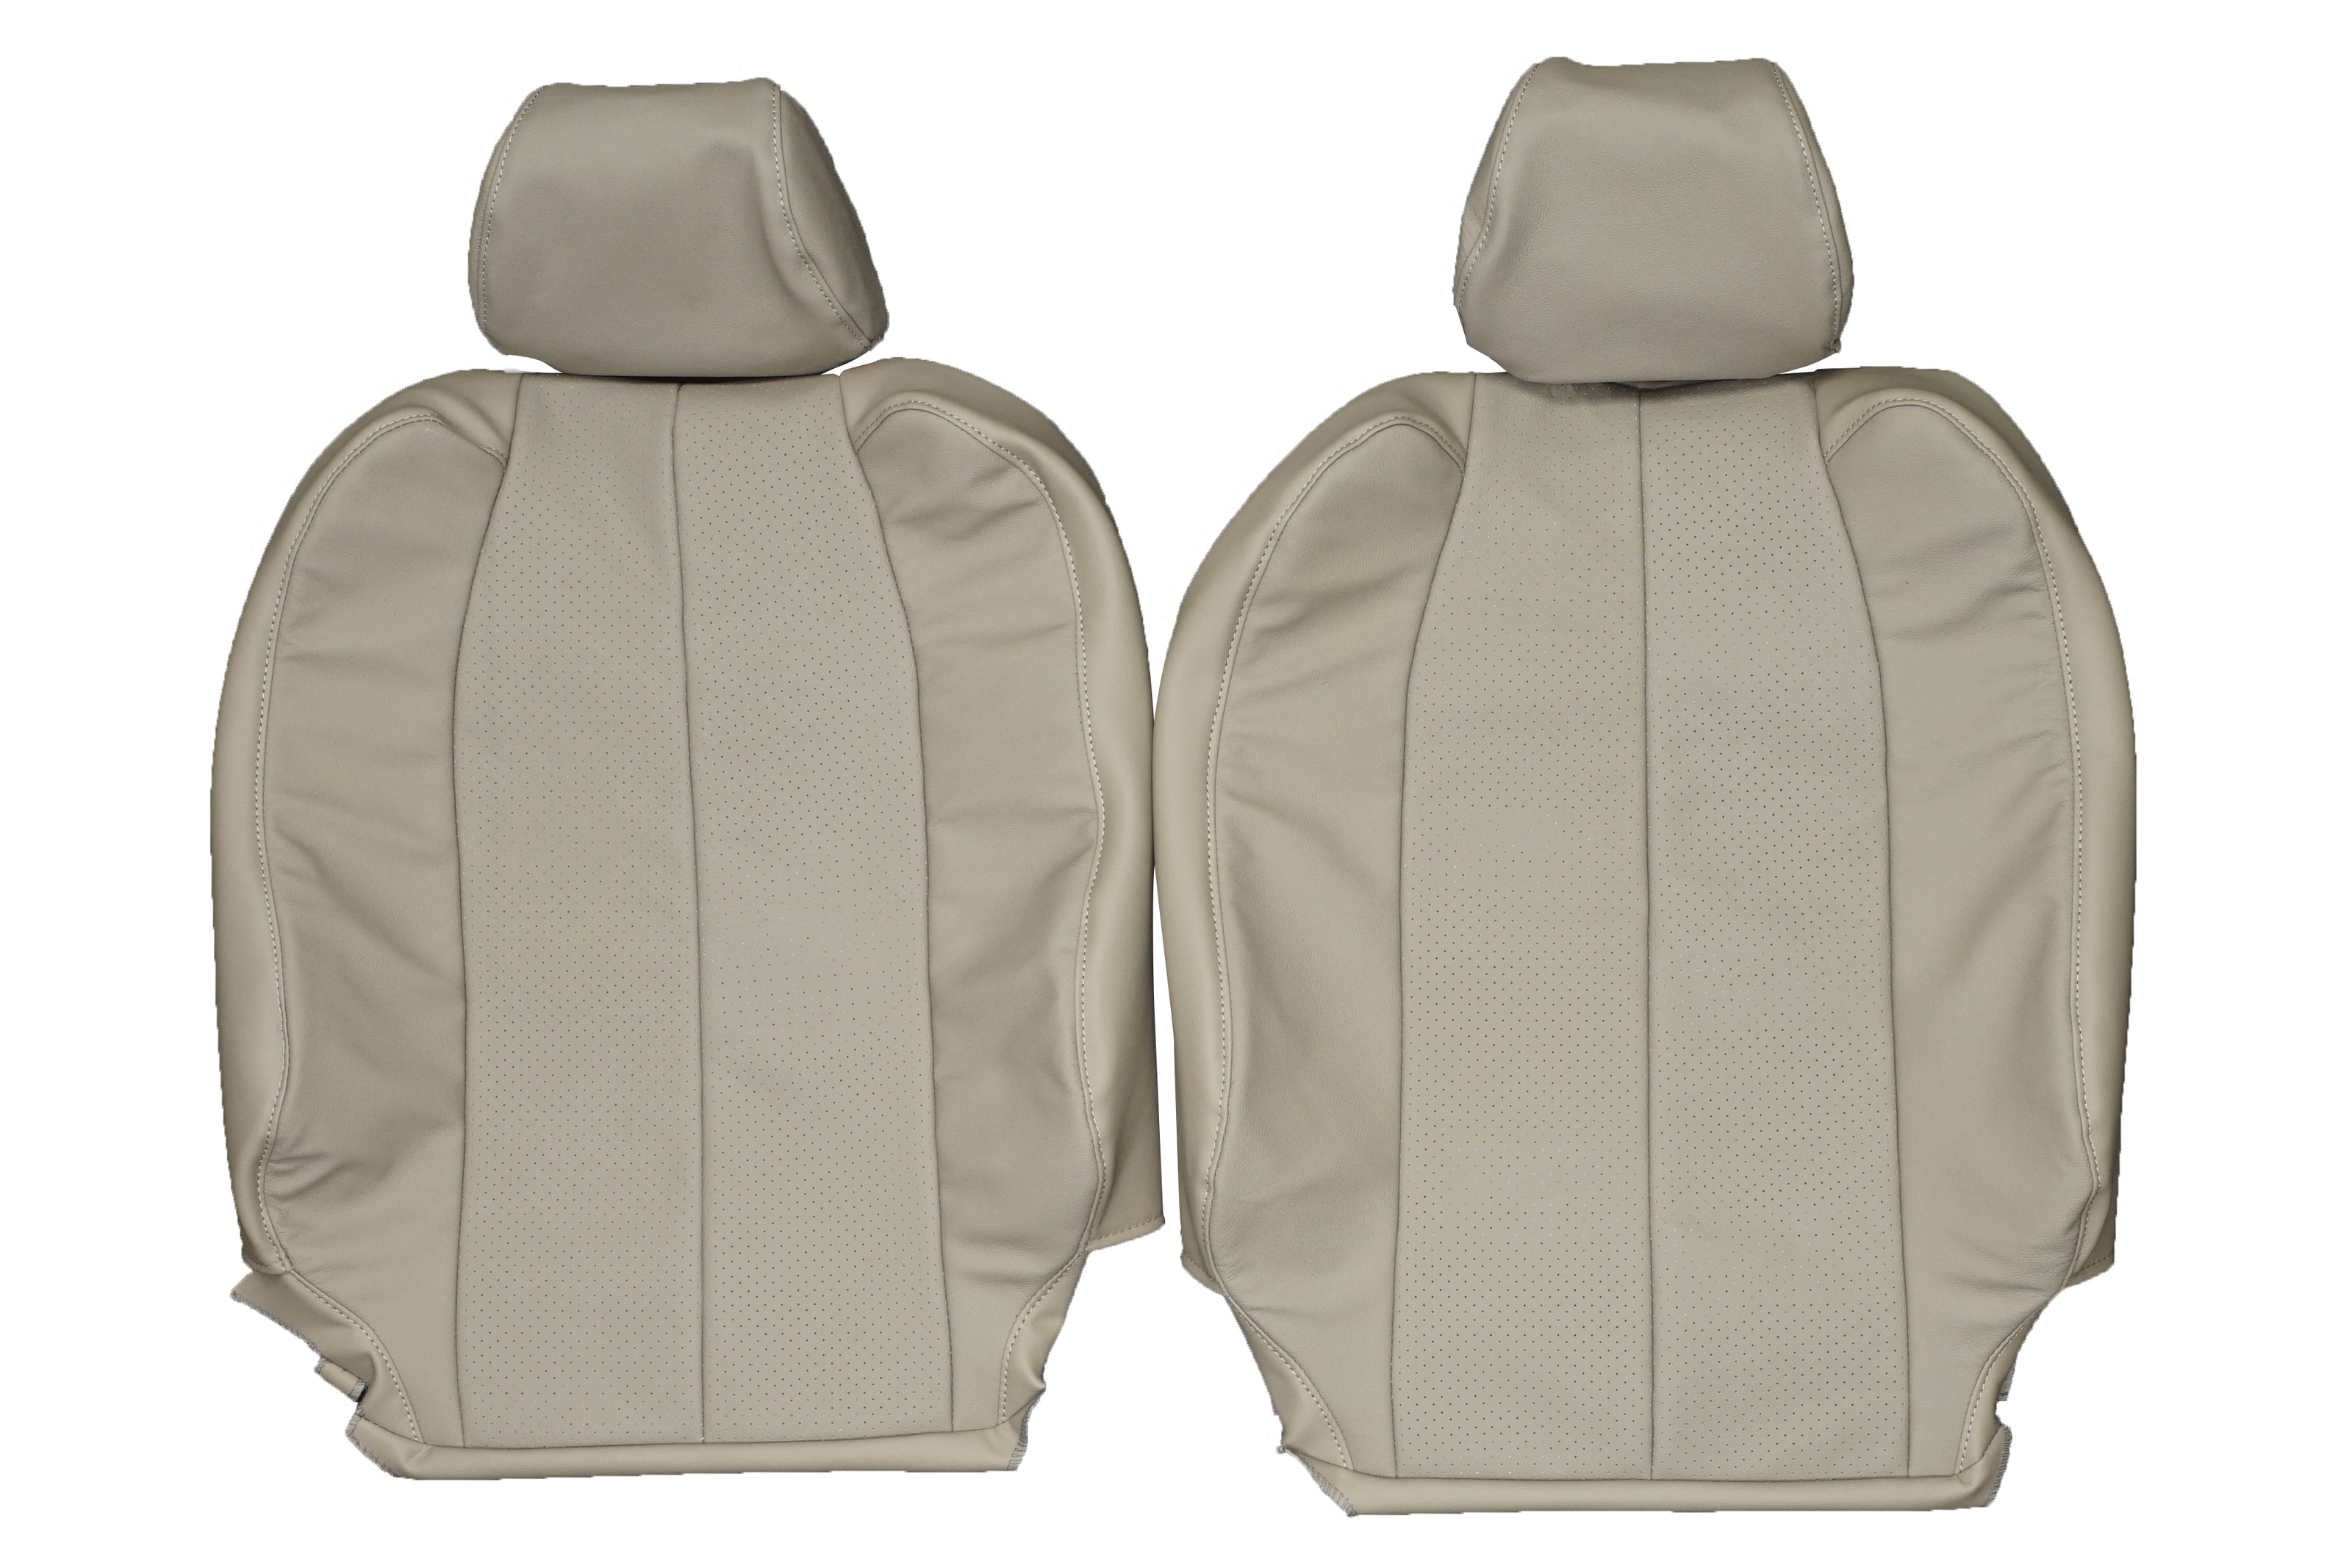 1999-2003 Toyota Solara Custom Real Leather Seat Covers (Front) - Lseat.com